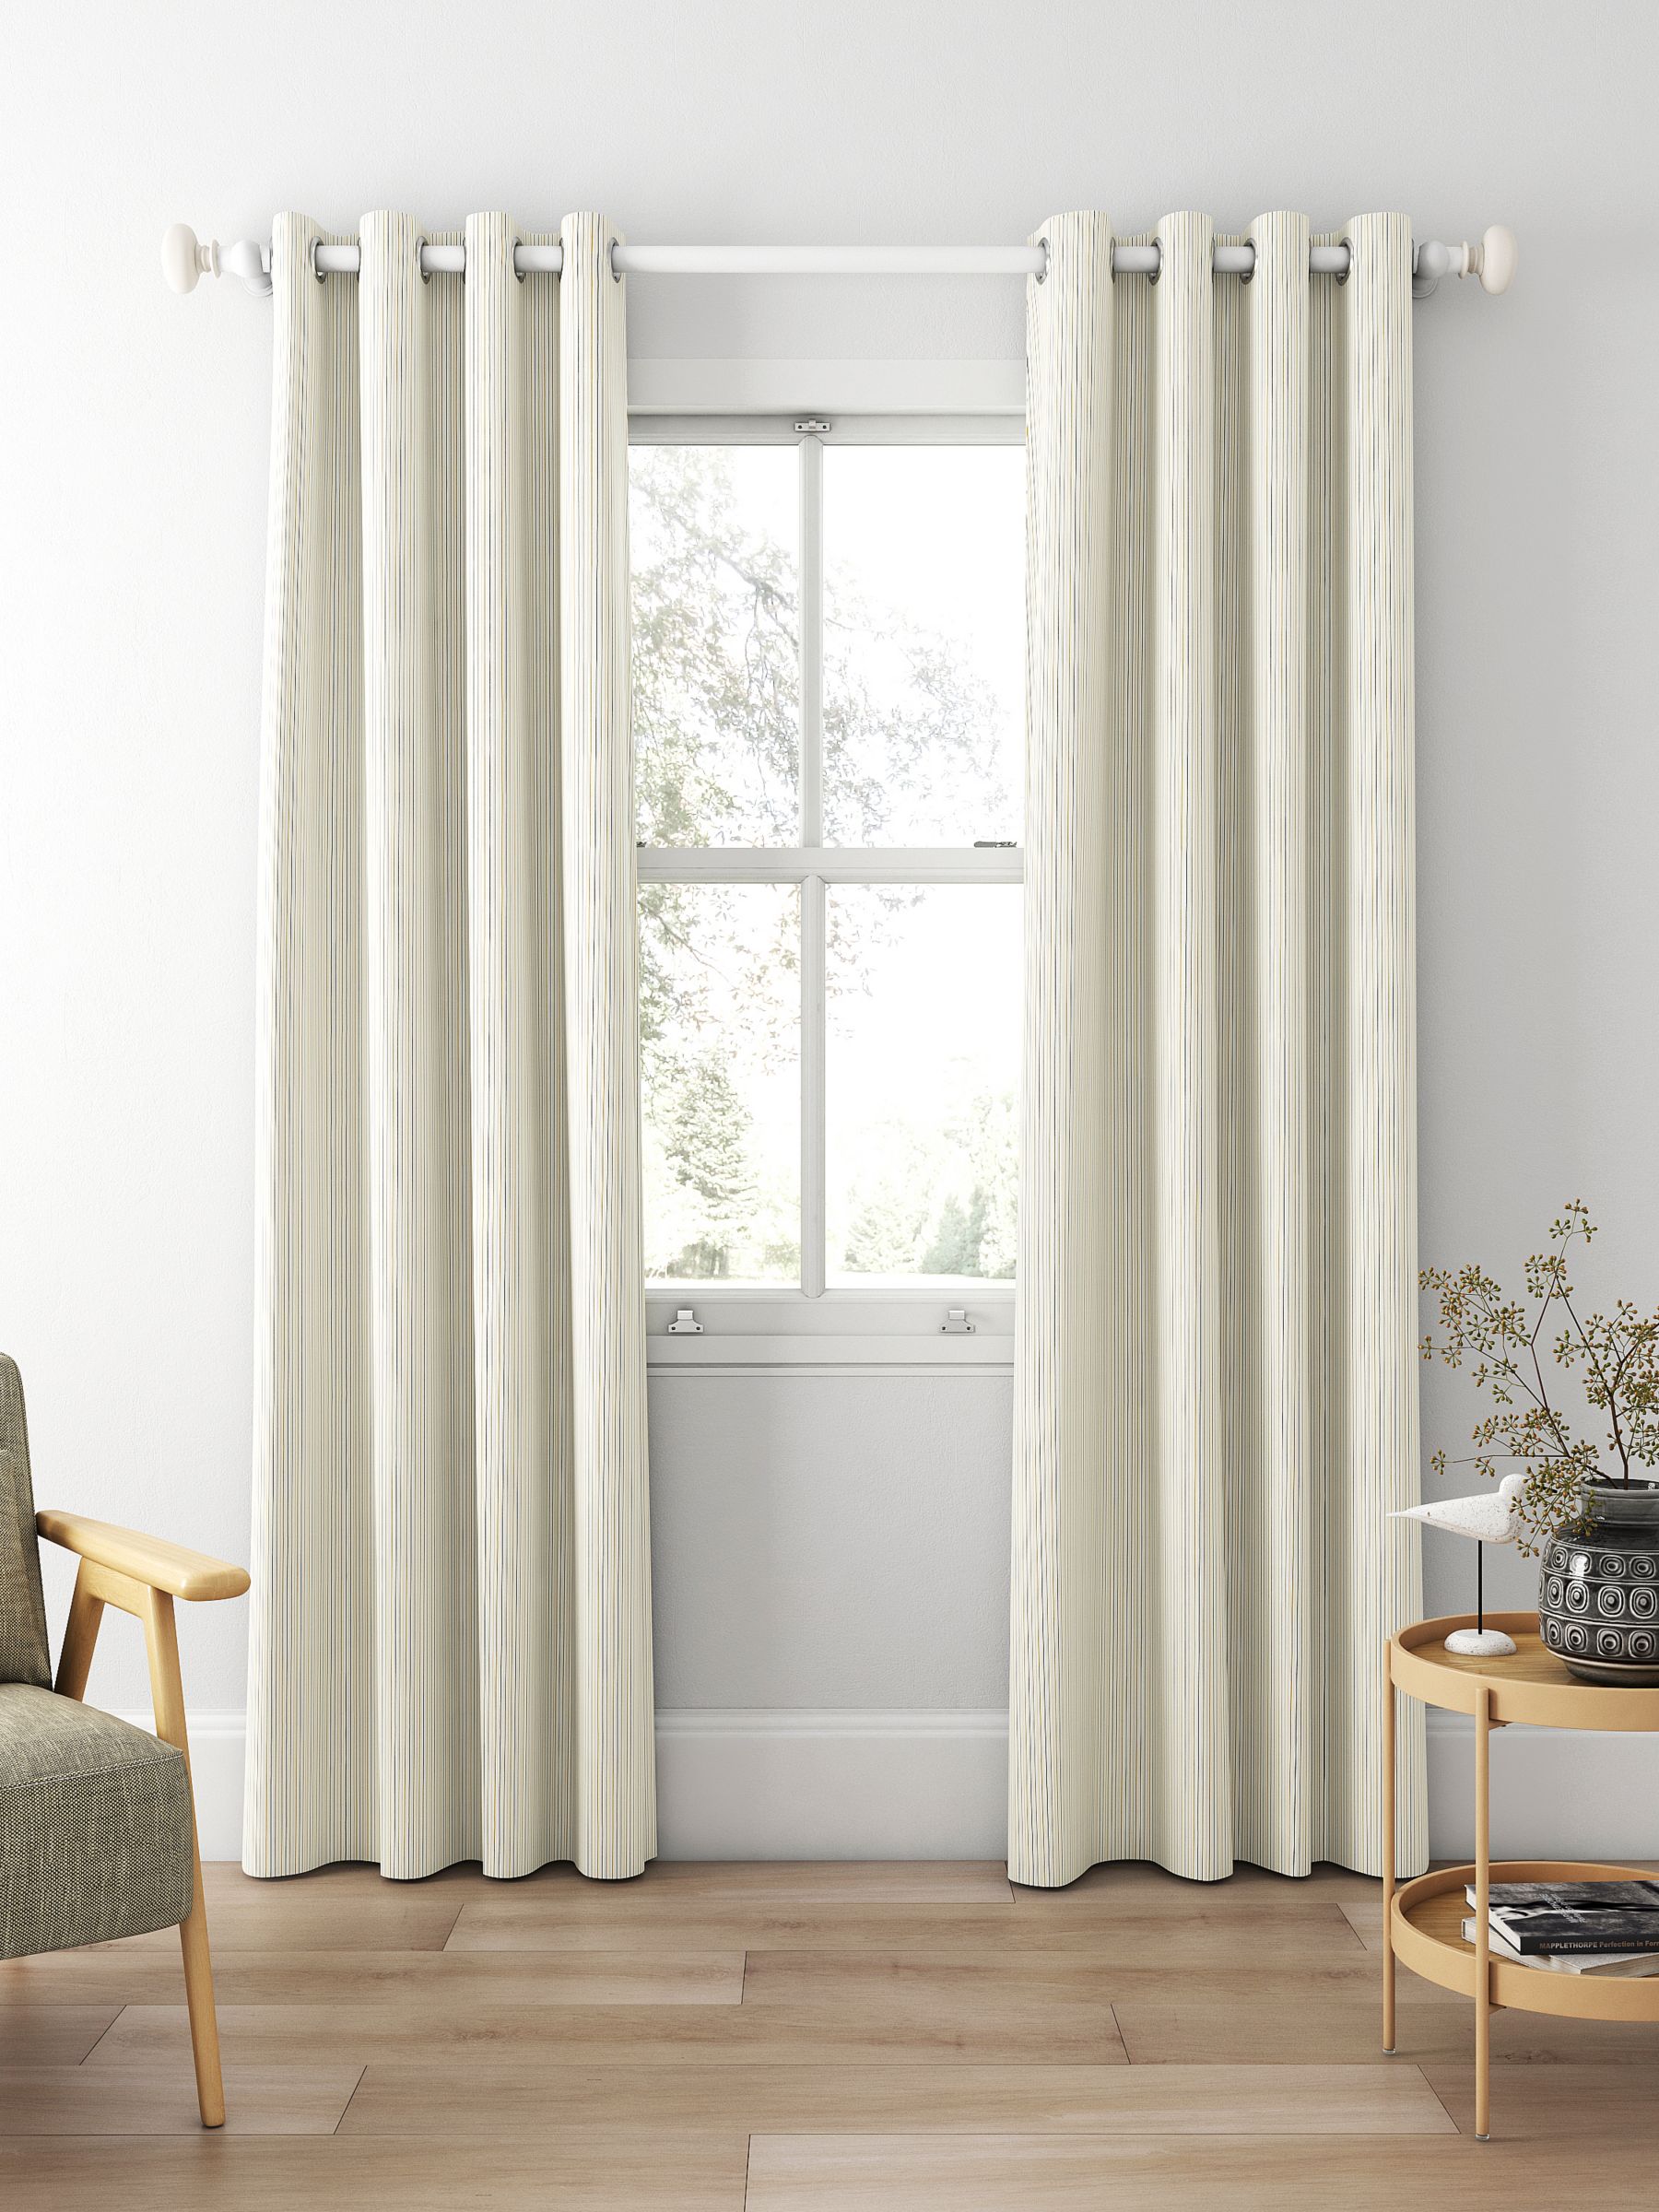 Clarke & Clarke Maryland Made to Measure Curtains, Ochre/Charcoal